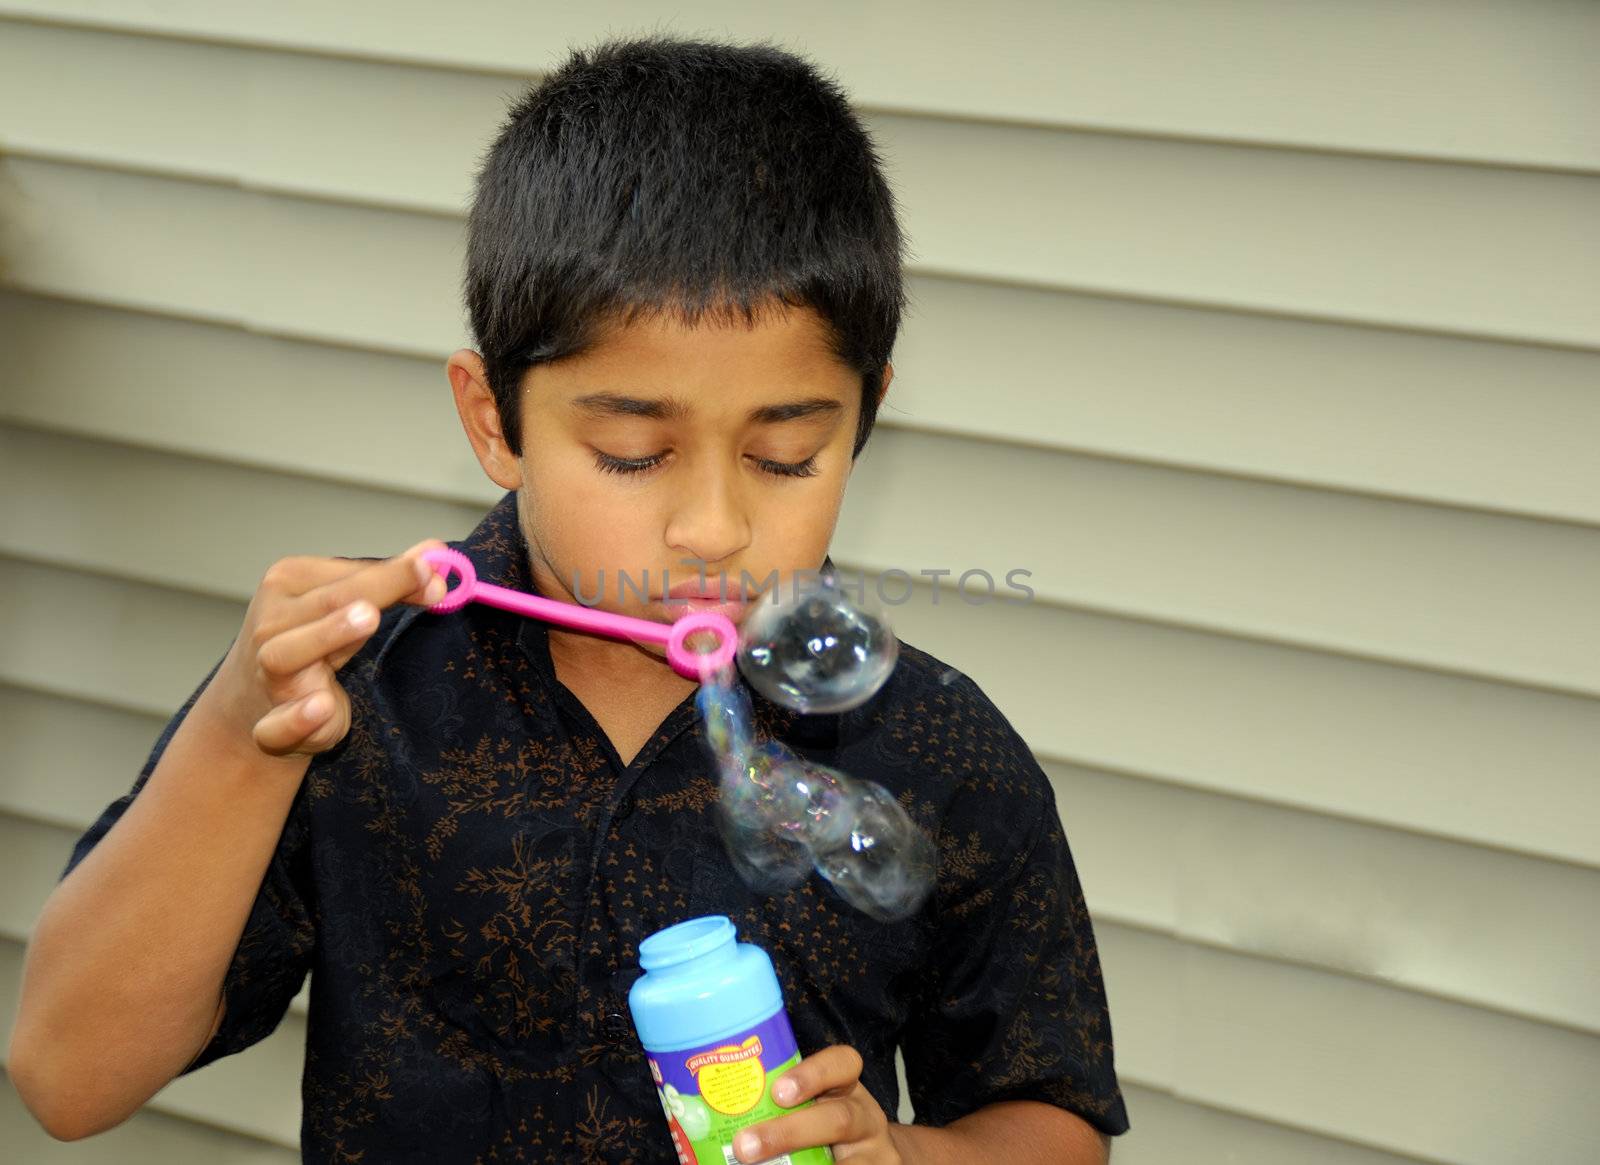 An handsome Indian kid blowing bubbles